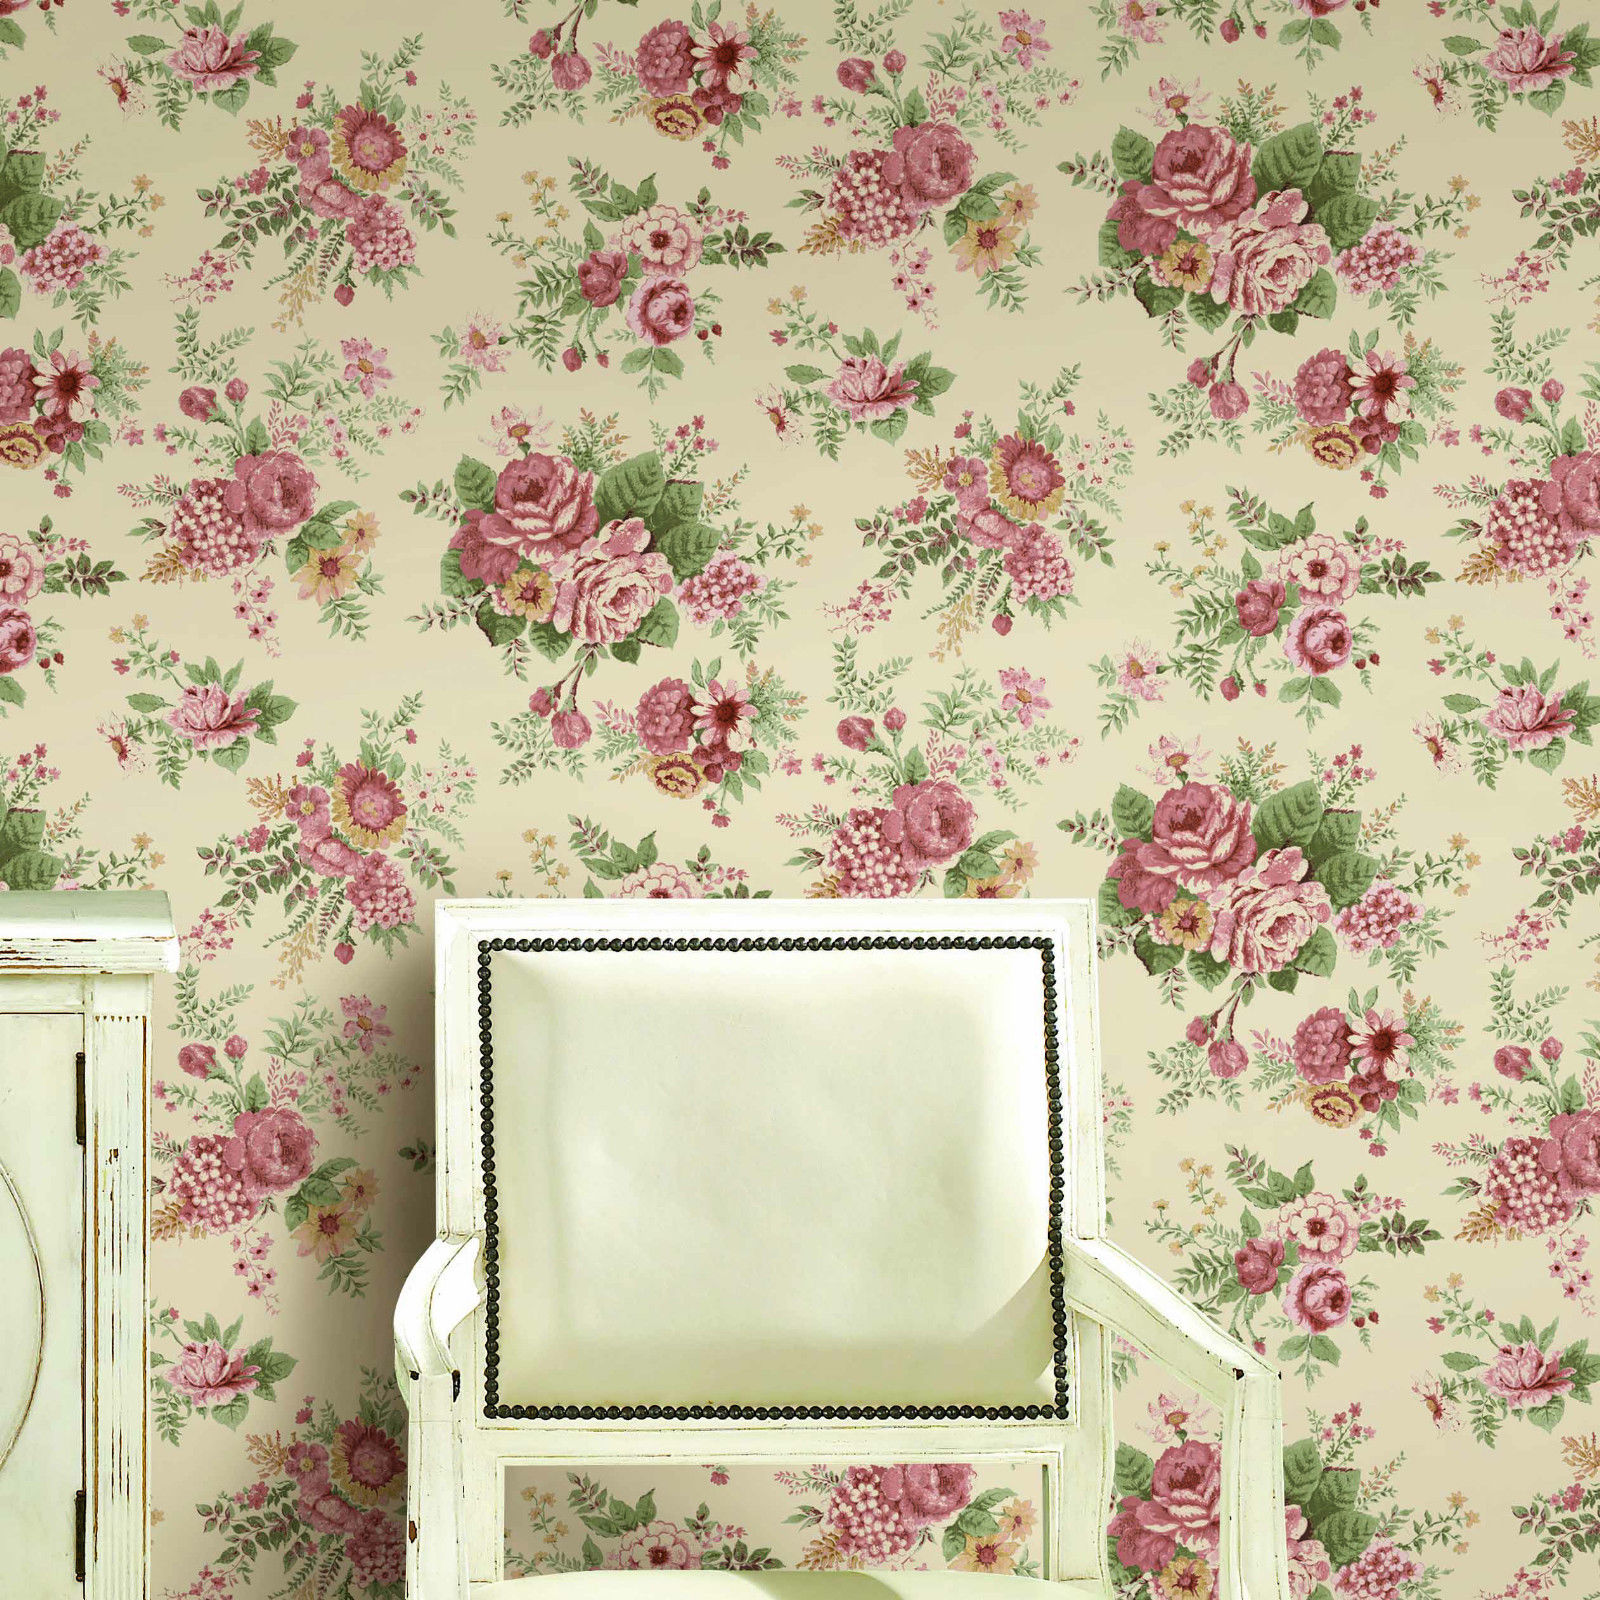  Victoria Scroll Floral Texture Embossed Shining Surface Wallpaper